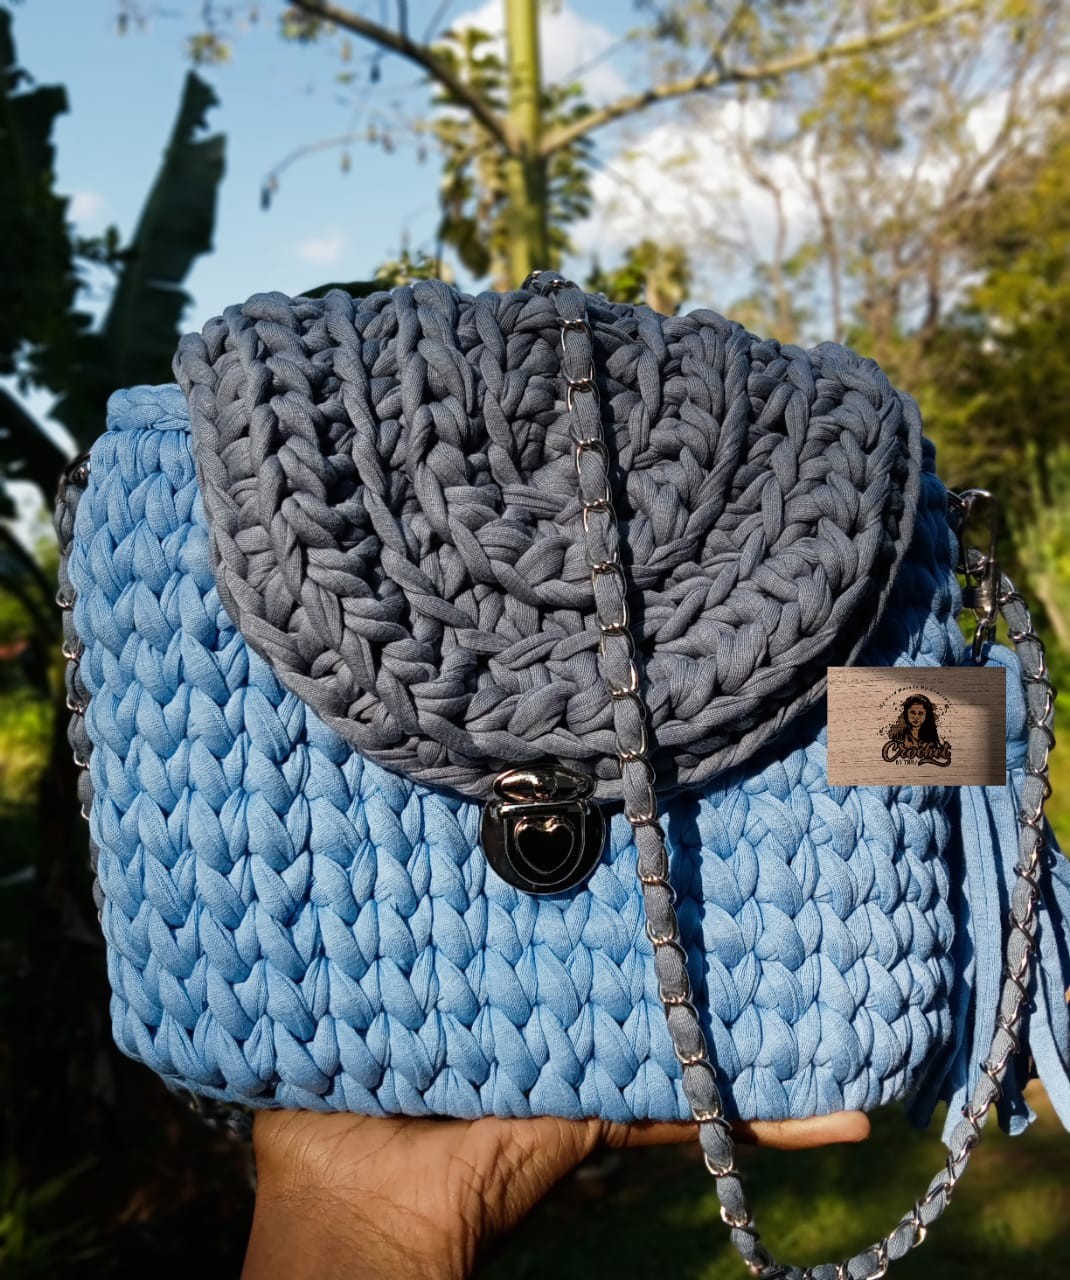 Crochet Hand Bags by Thili